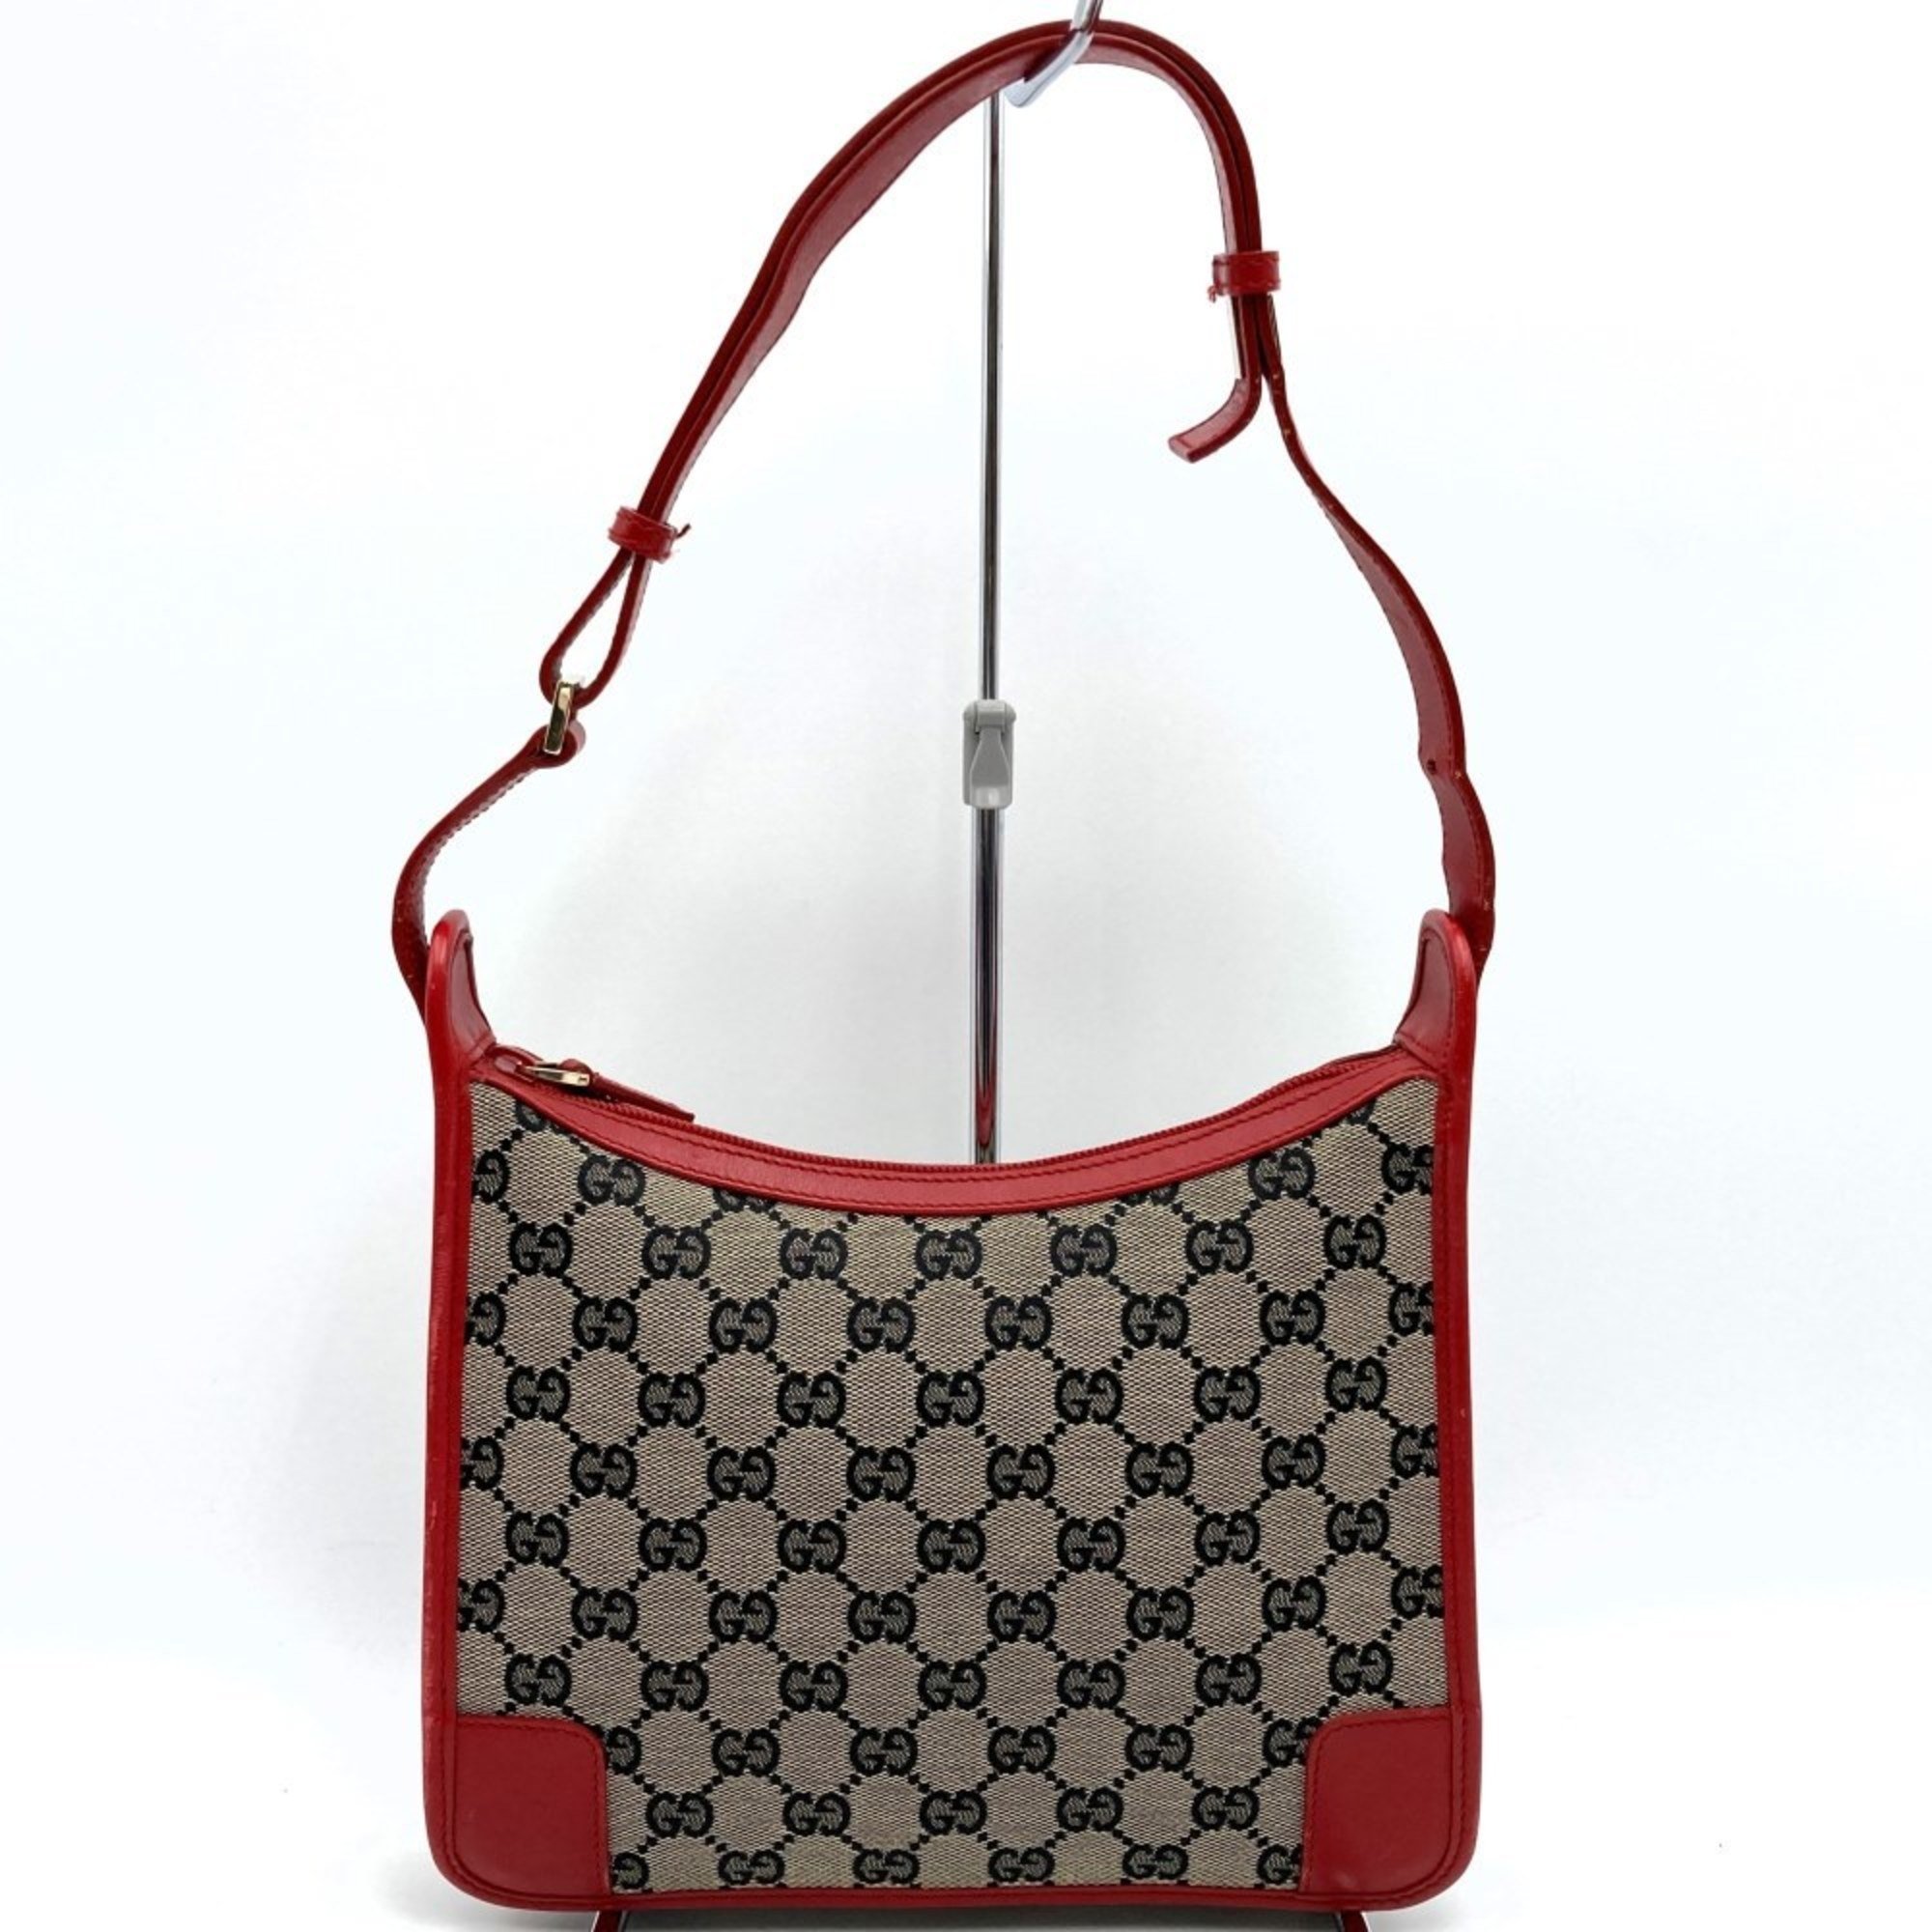 Gucci Shoulder Bag Red GG Canvas Leather Women's 001 4206 GUCCI